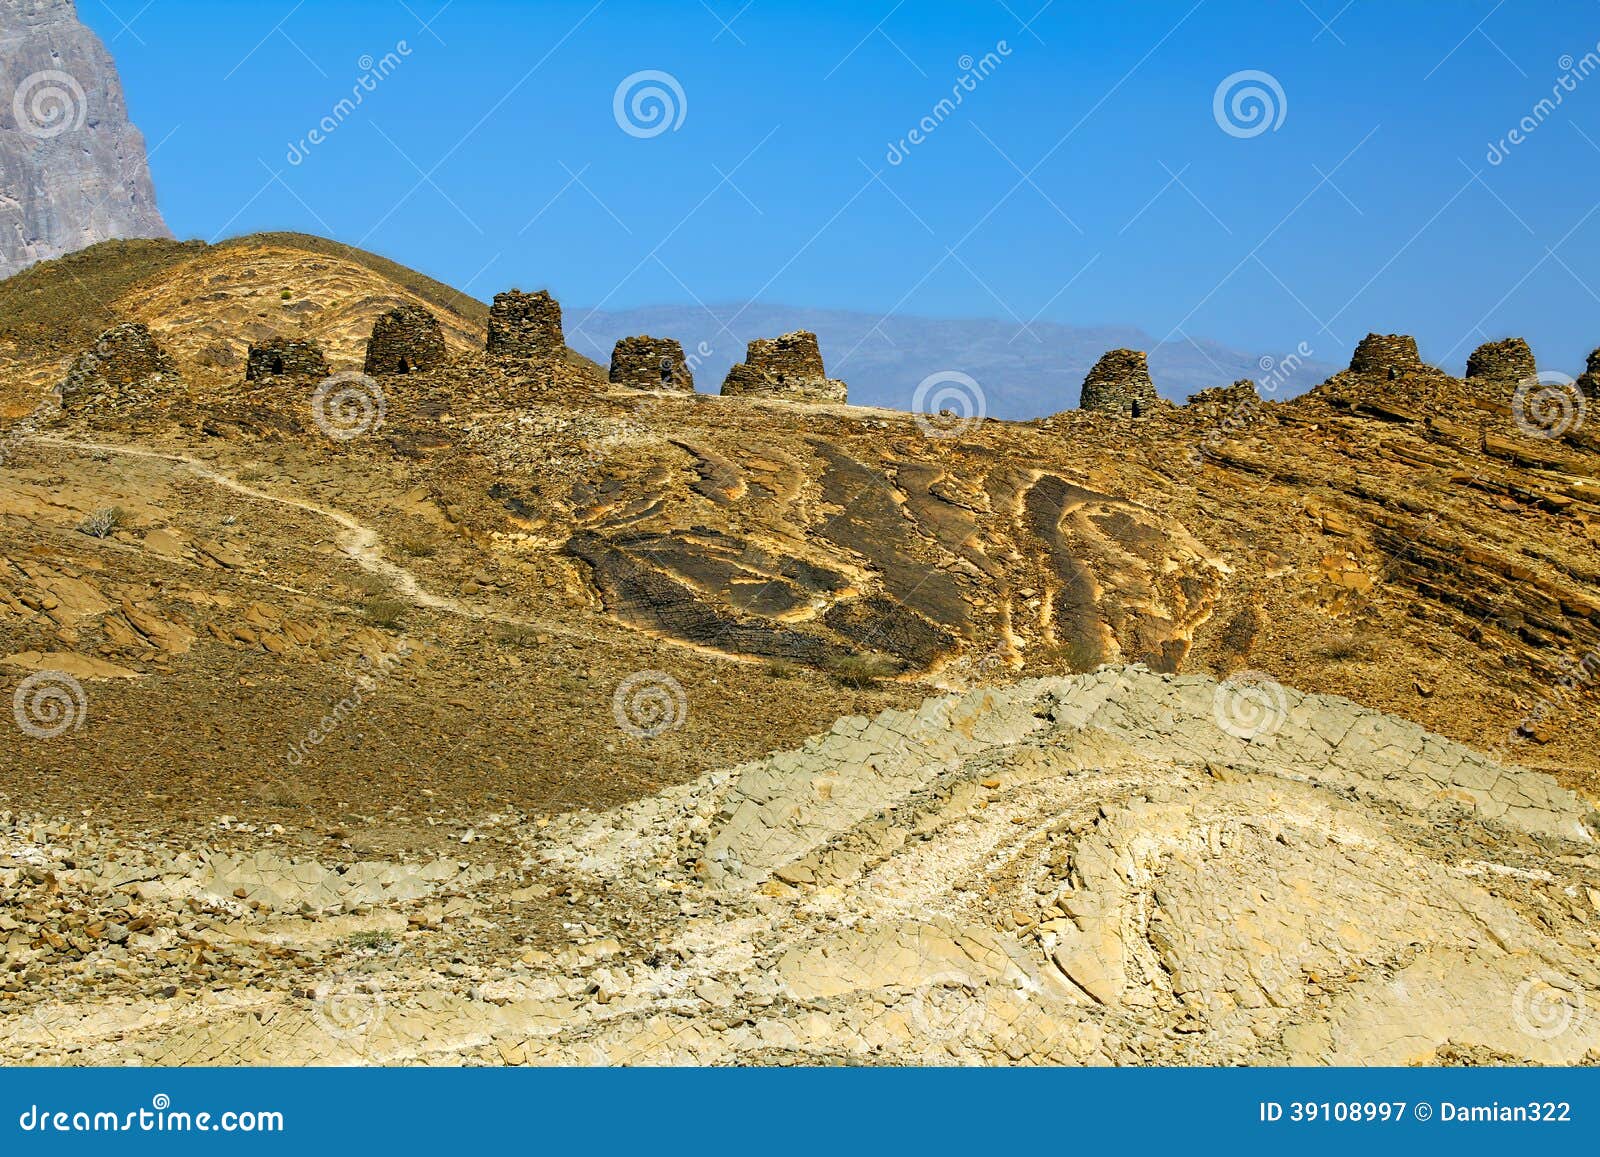 the ancient beehive tombs at jabal misht western